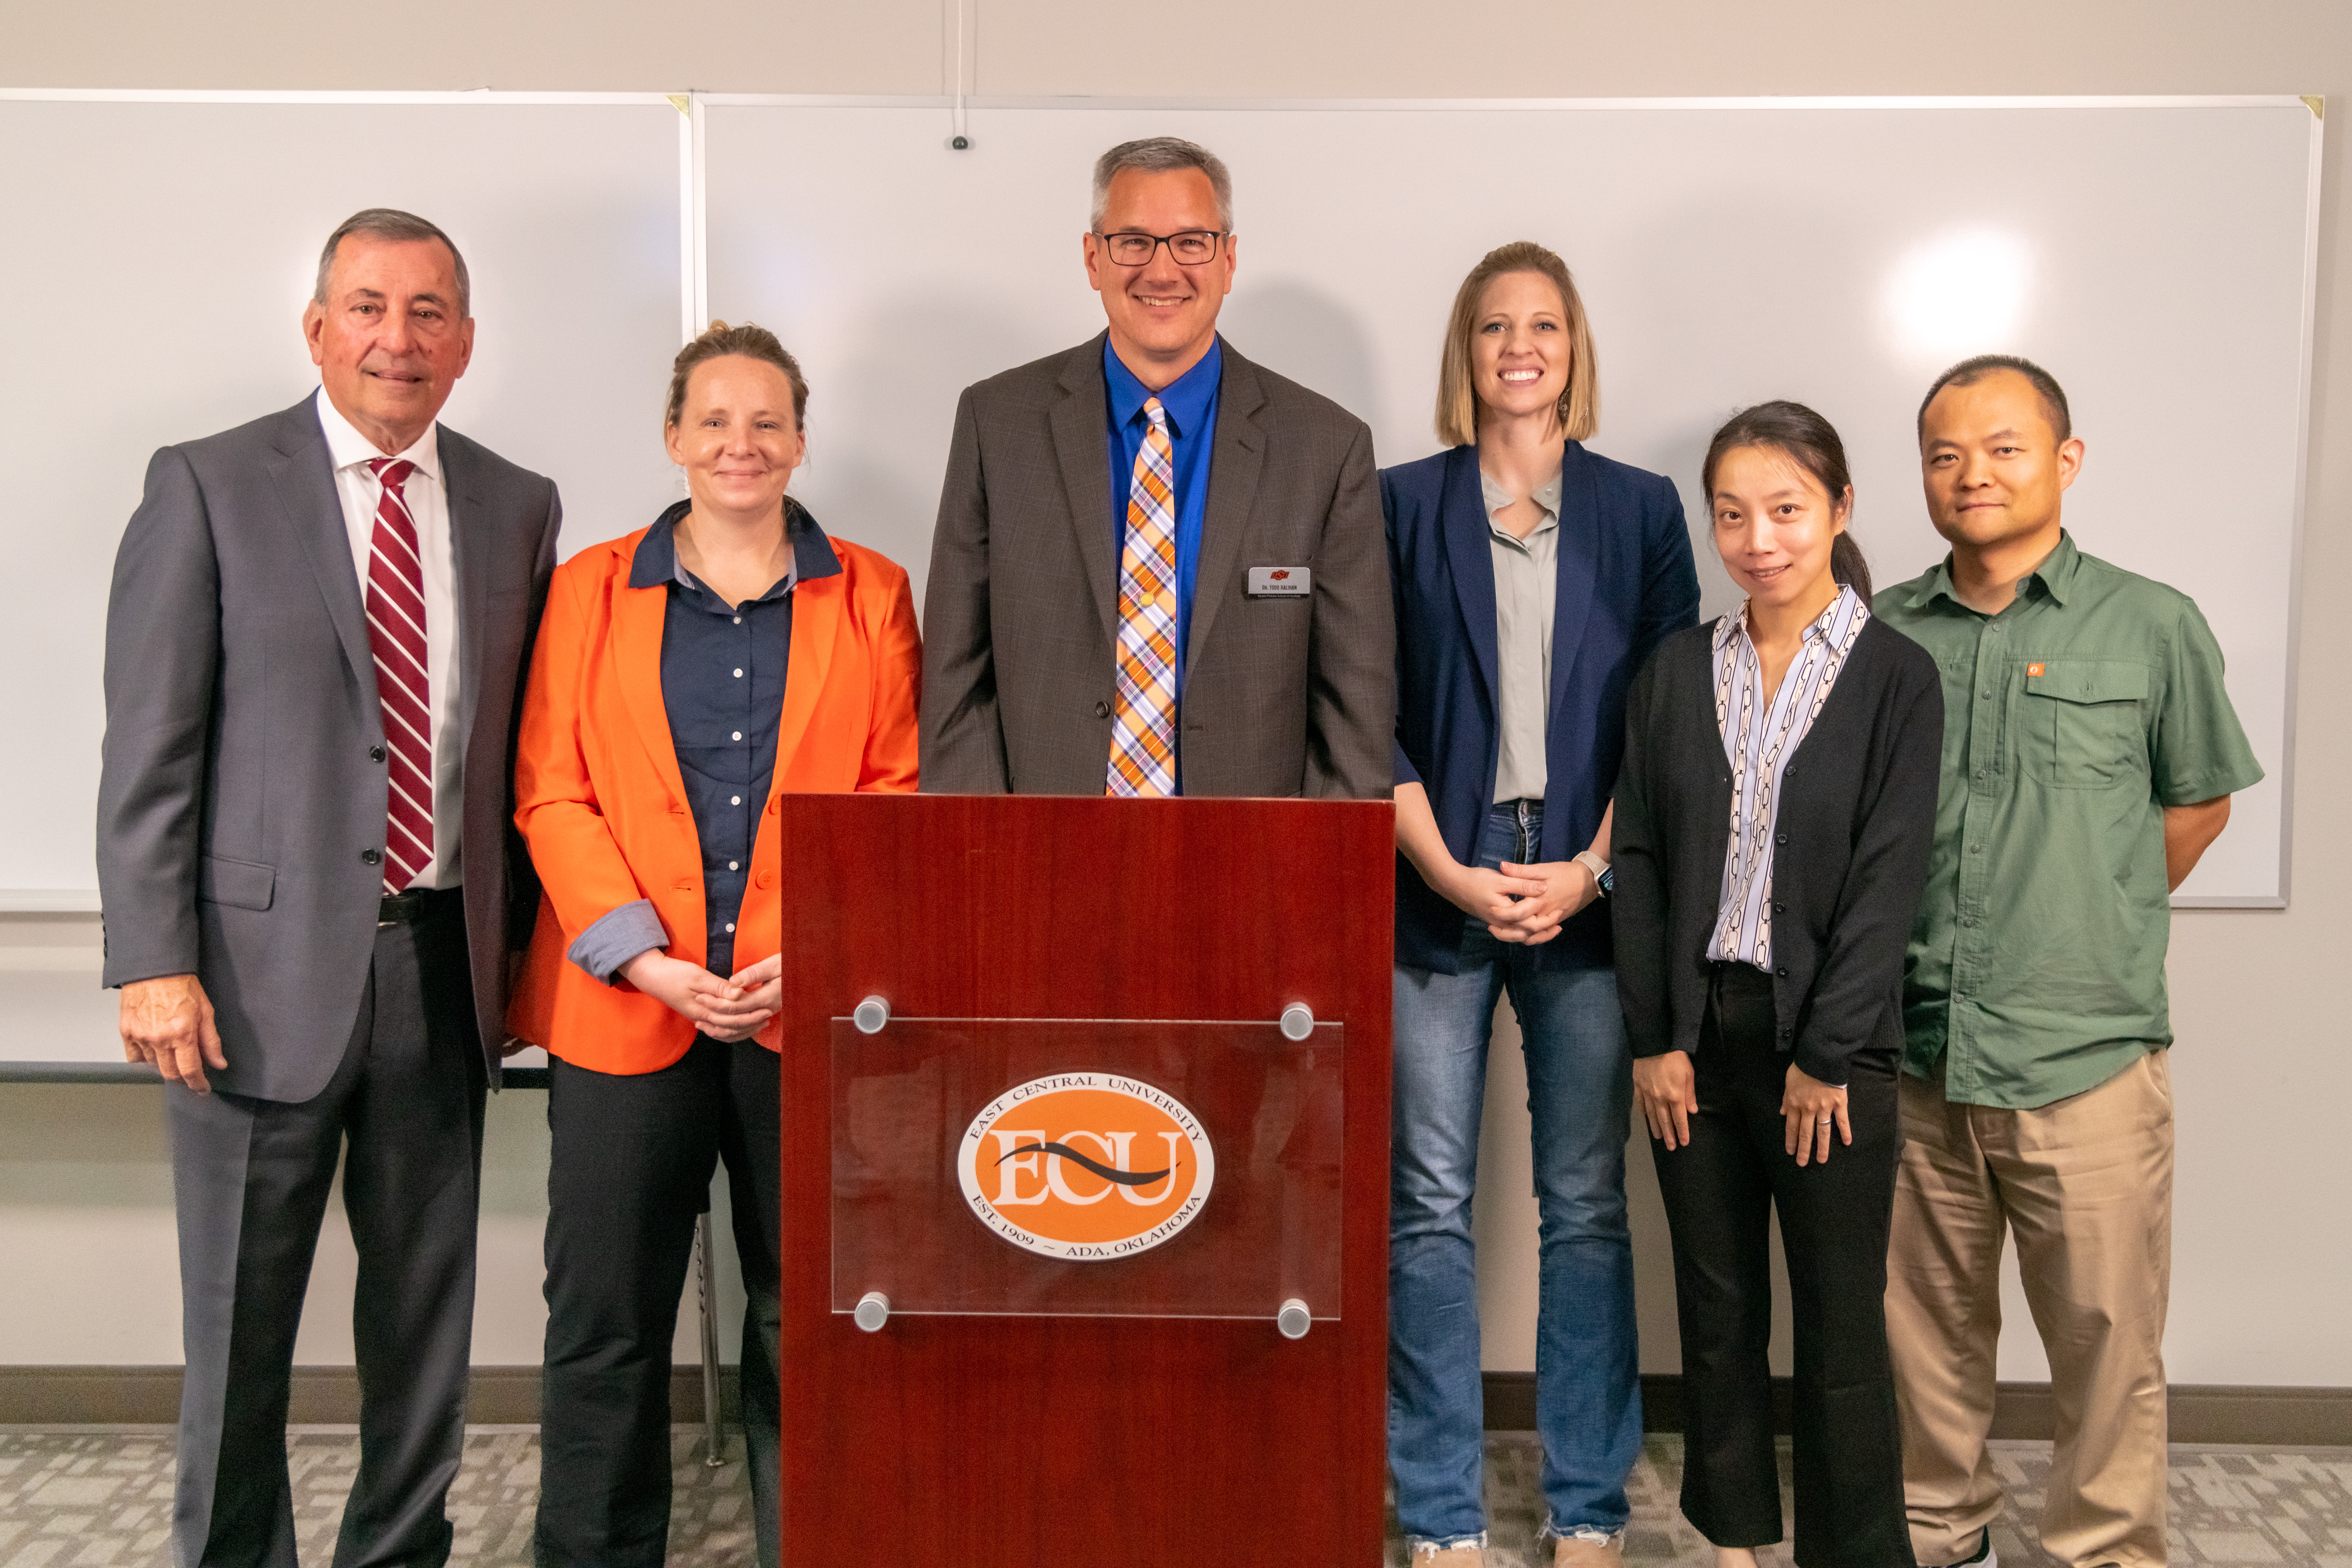 Pictured: (left to right) Duane Smith, director of the Oka’ Institute, and OSU faculty members Sabrina Beckmann, Todd Halihan, Caitlin Barnes, Tingying Xu and Yipeng Zhang.